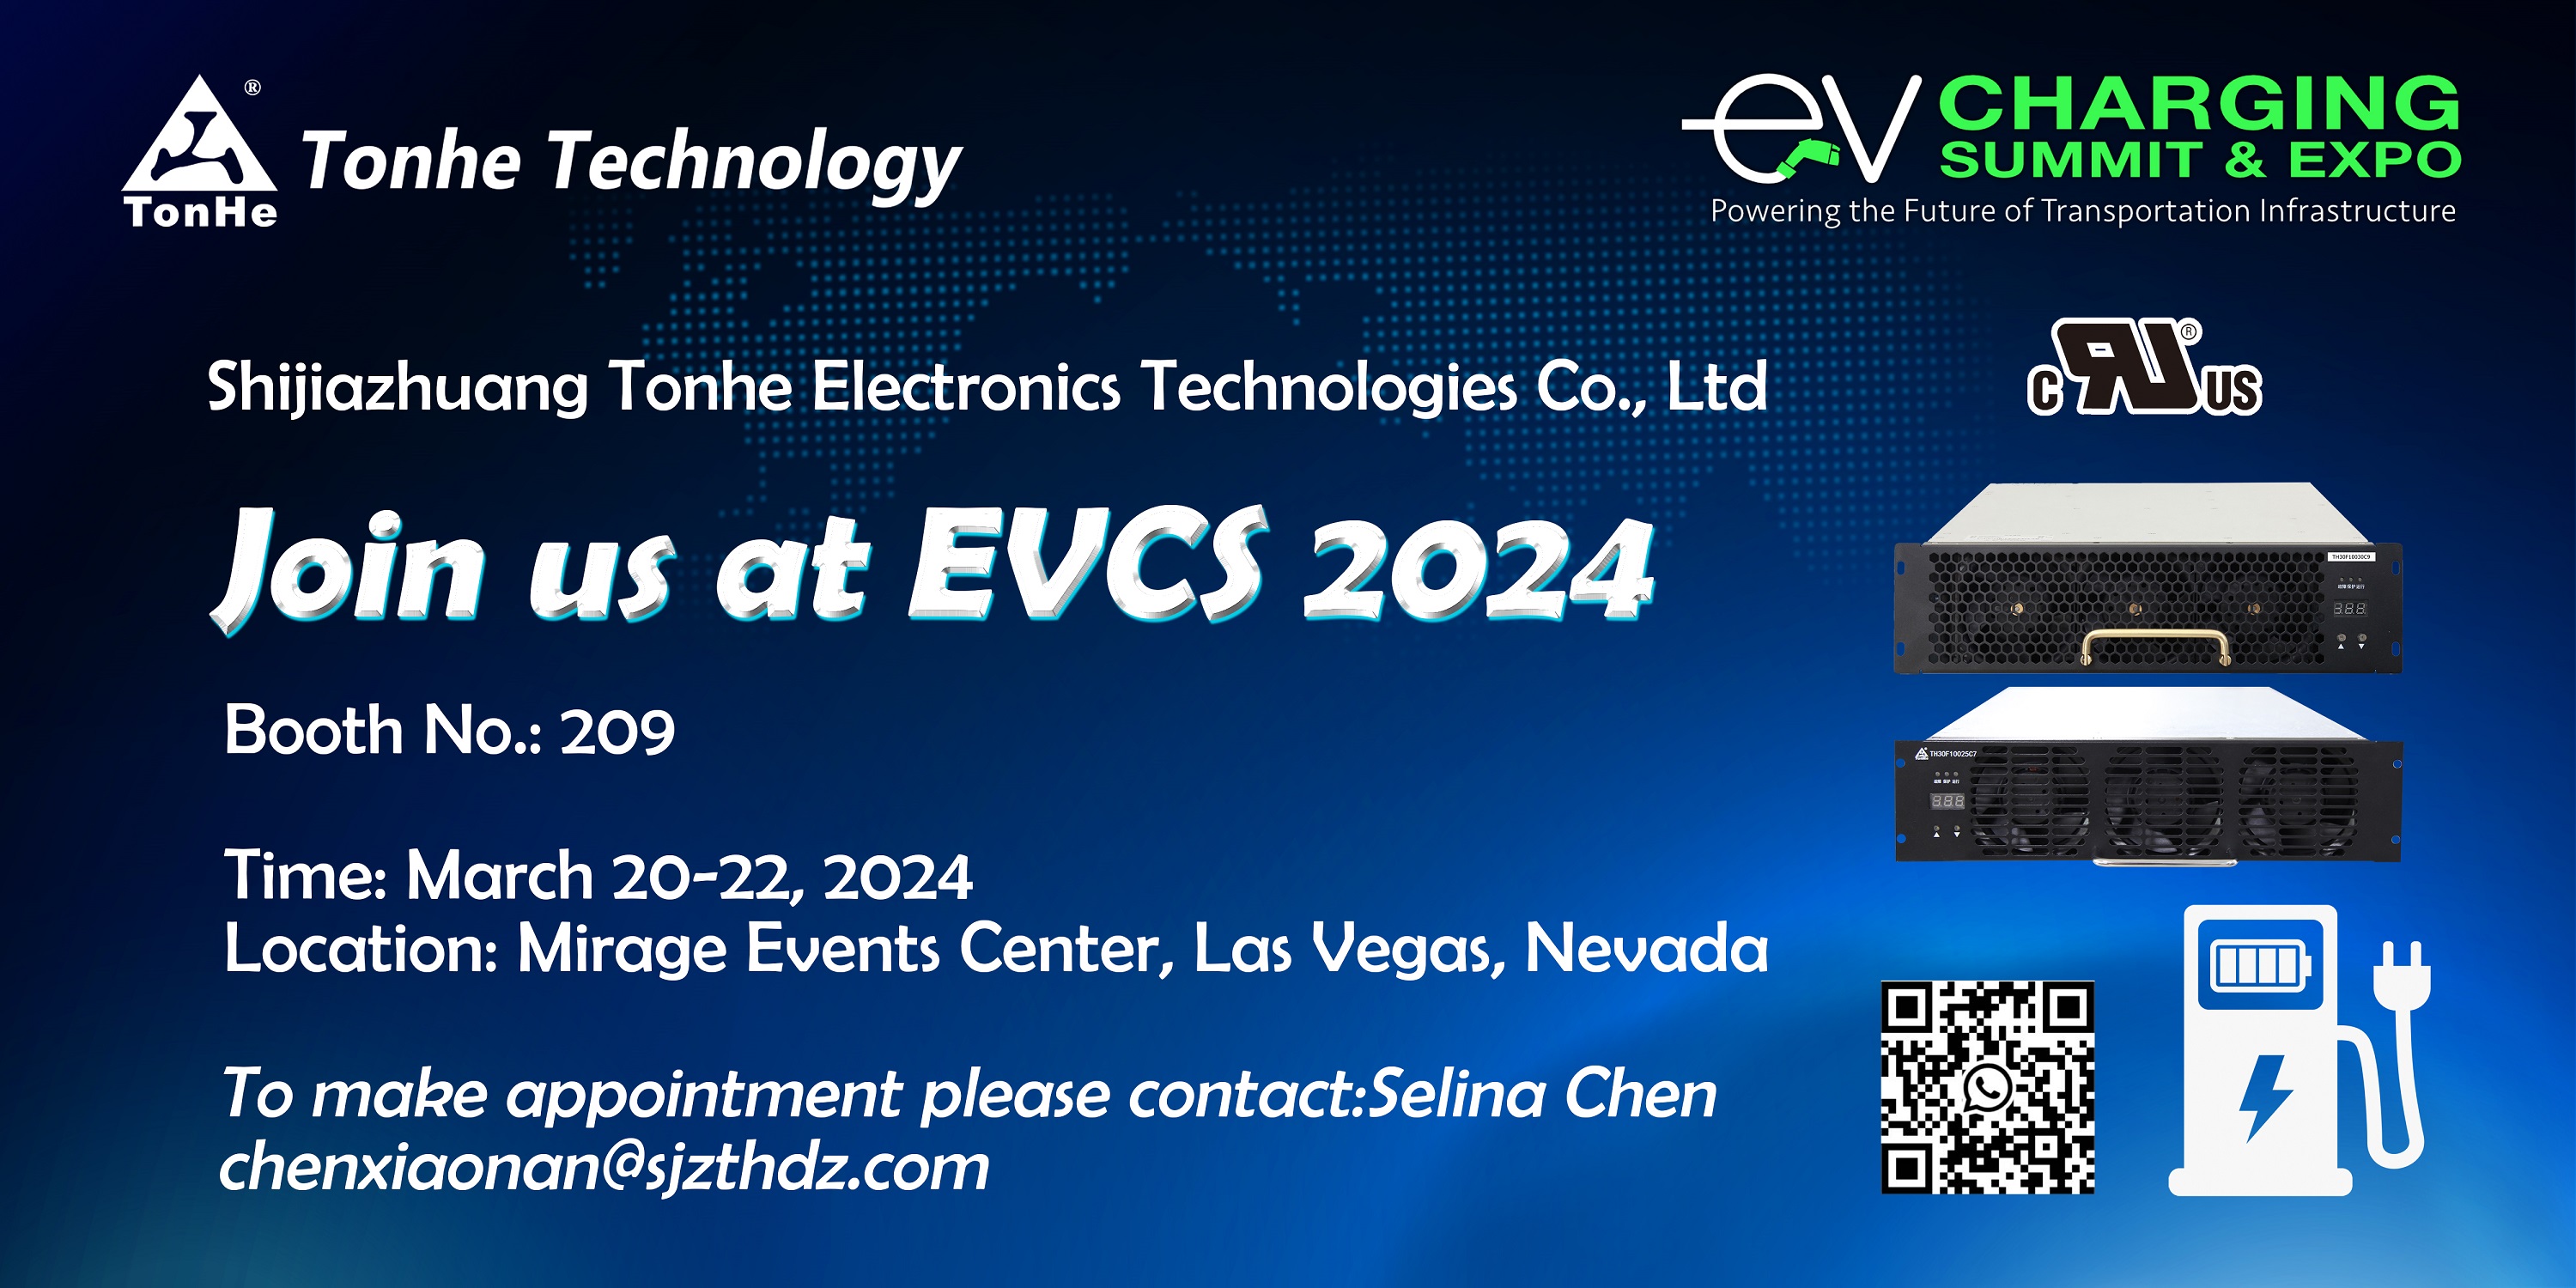 Tonhe Technology would like extend sincere invitation to all customers and friends to visit us at Booth 209 EVCS 2024 LasVegas.